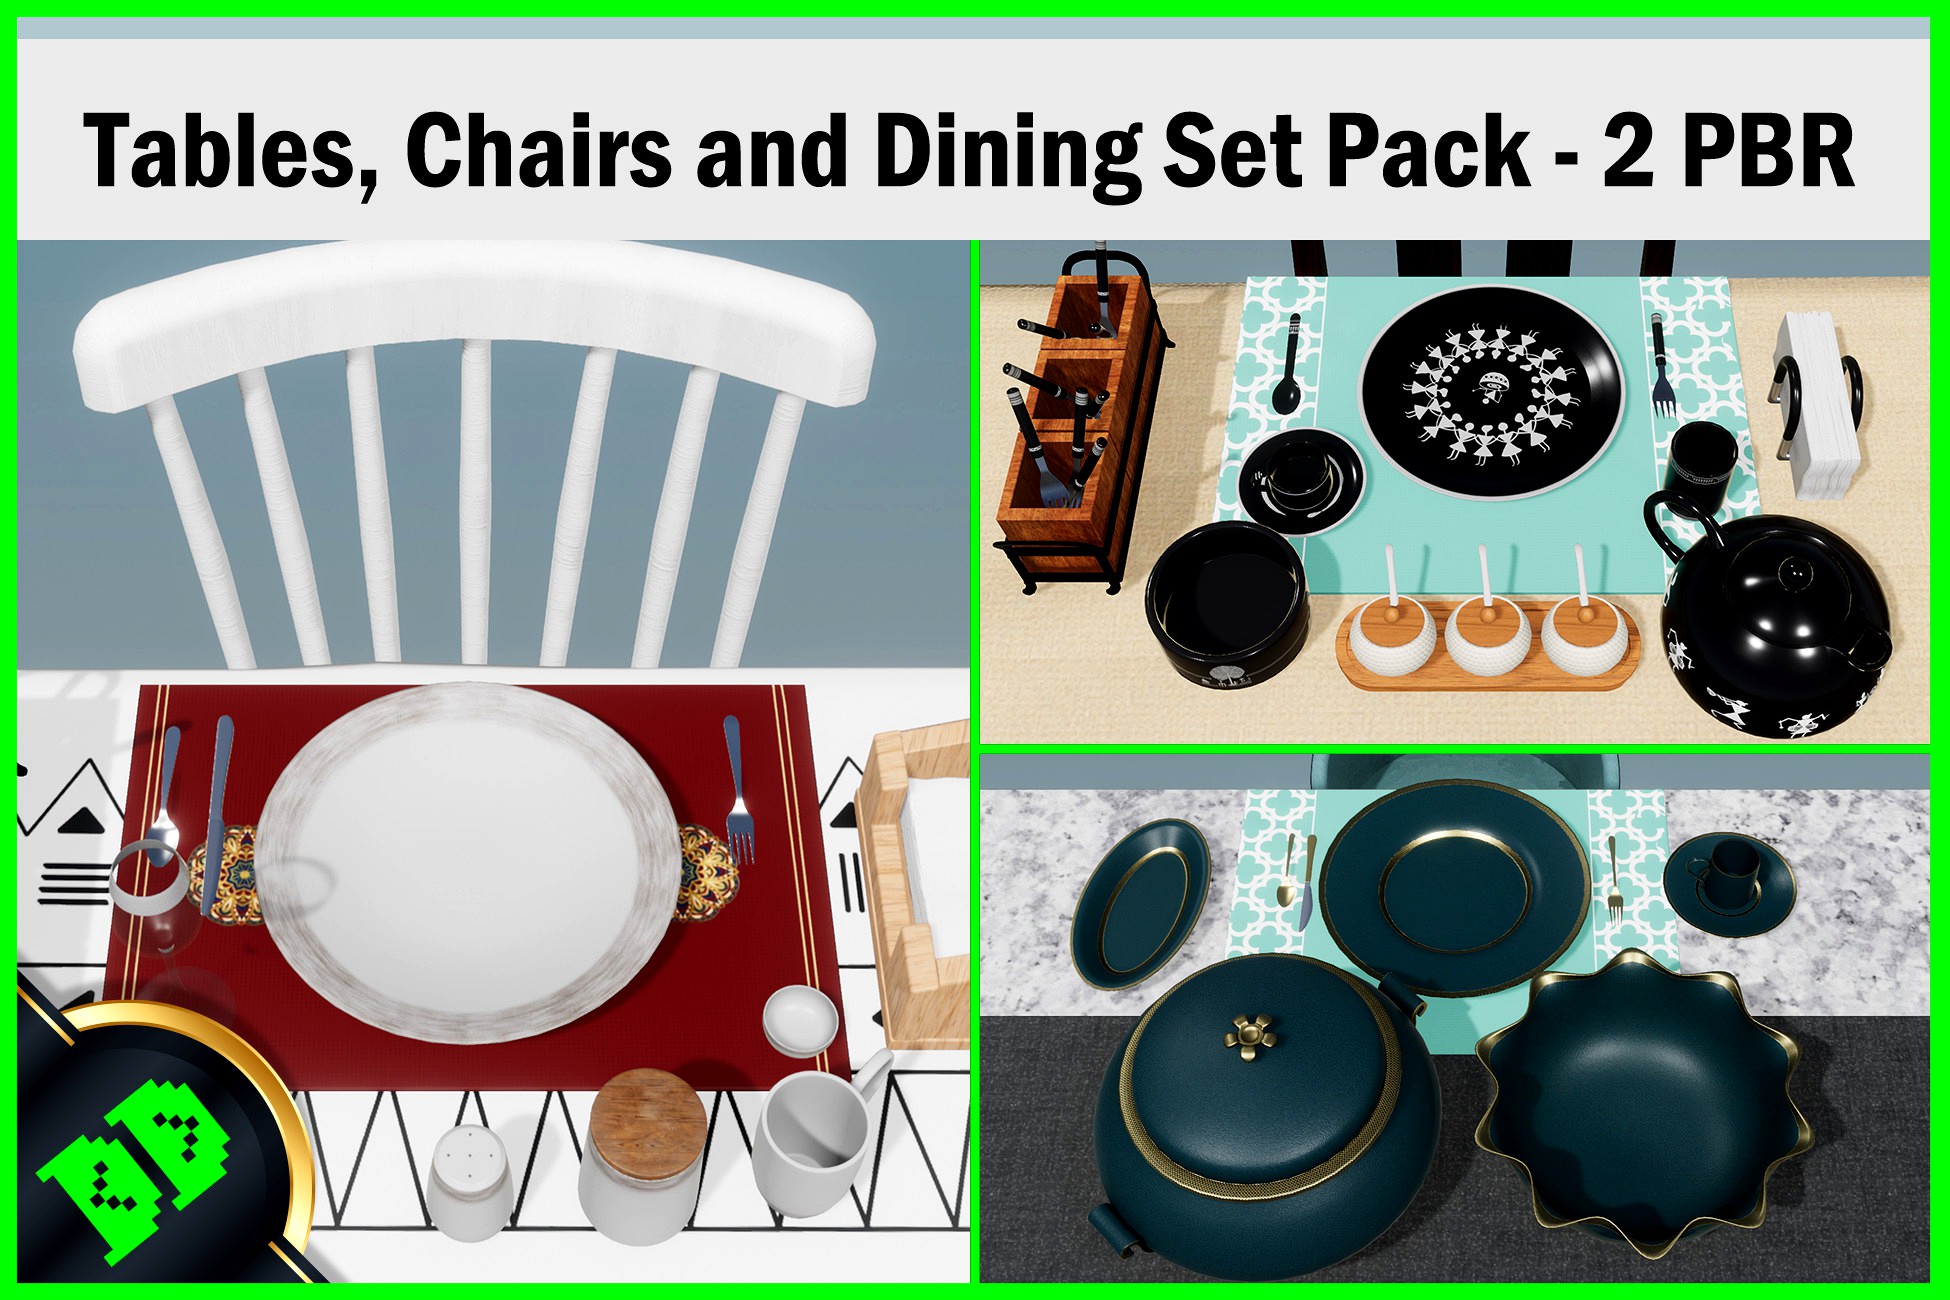 Tables, Chairs and Dining Set Pack - 2 PBR